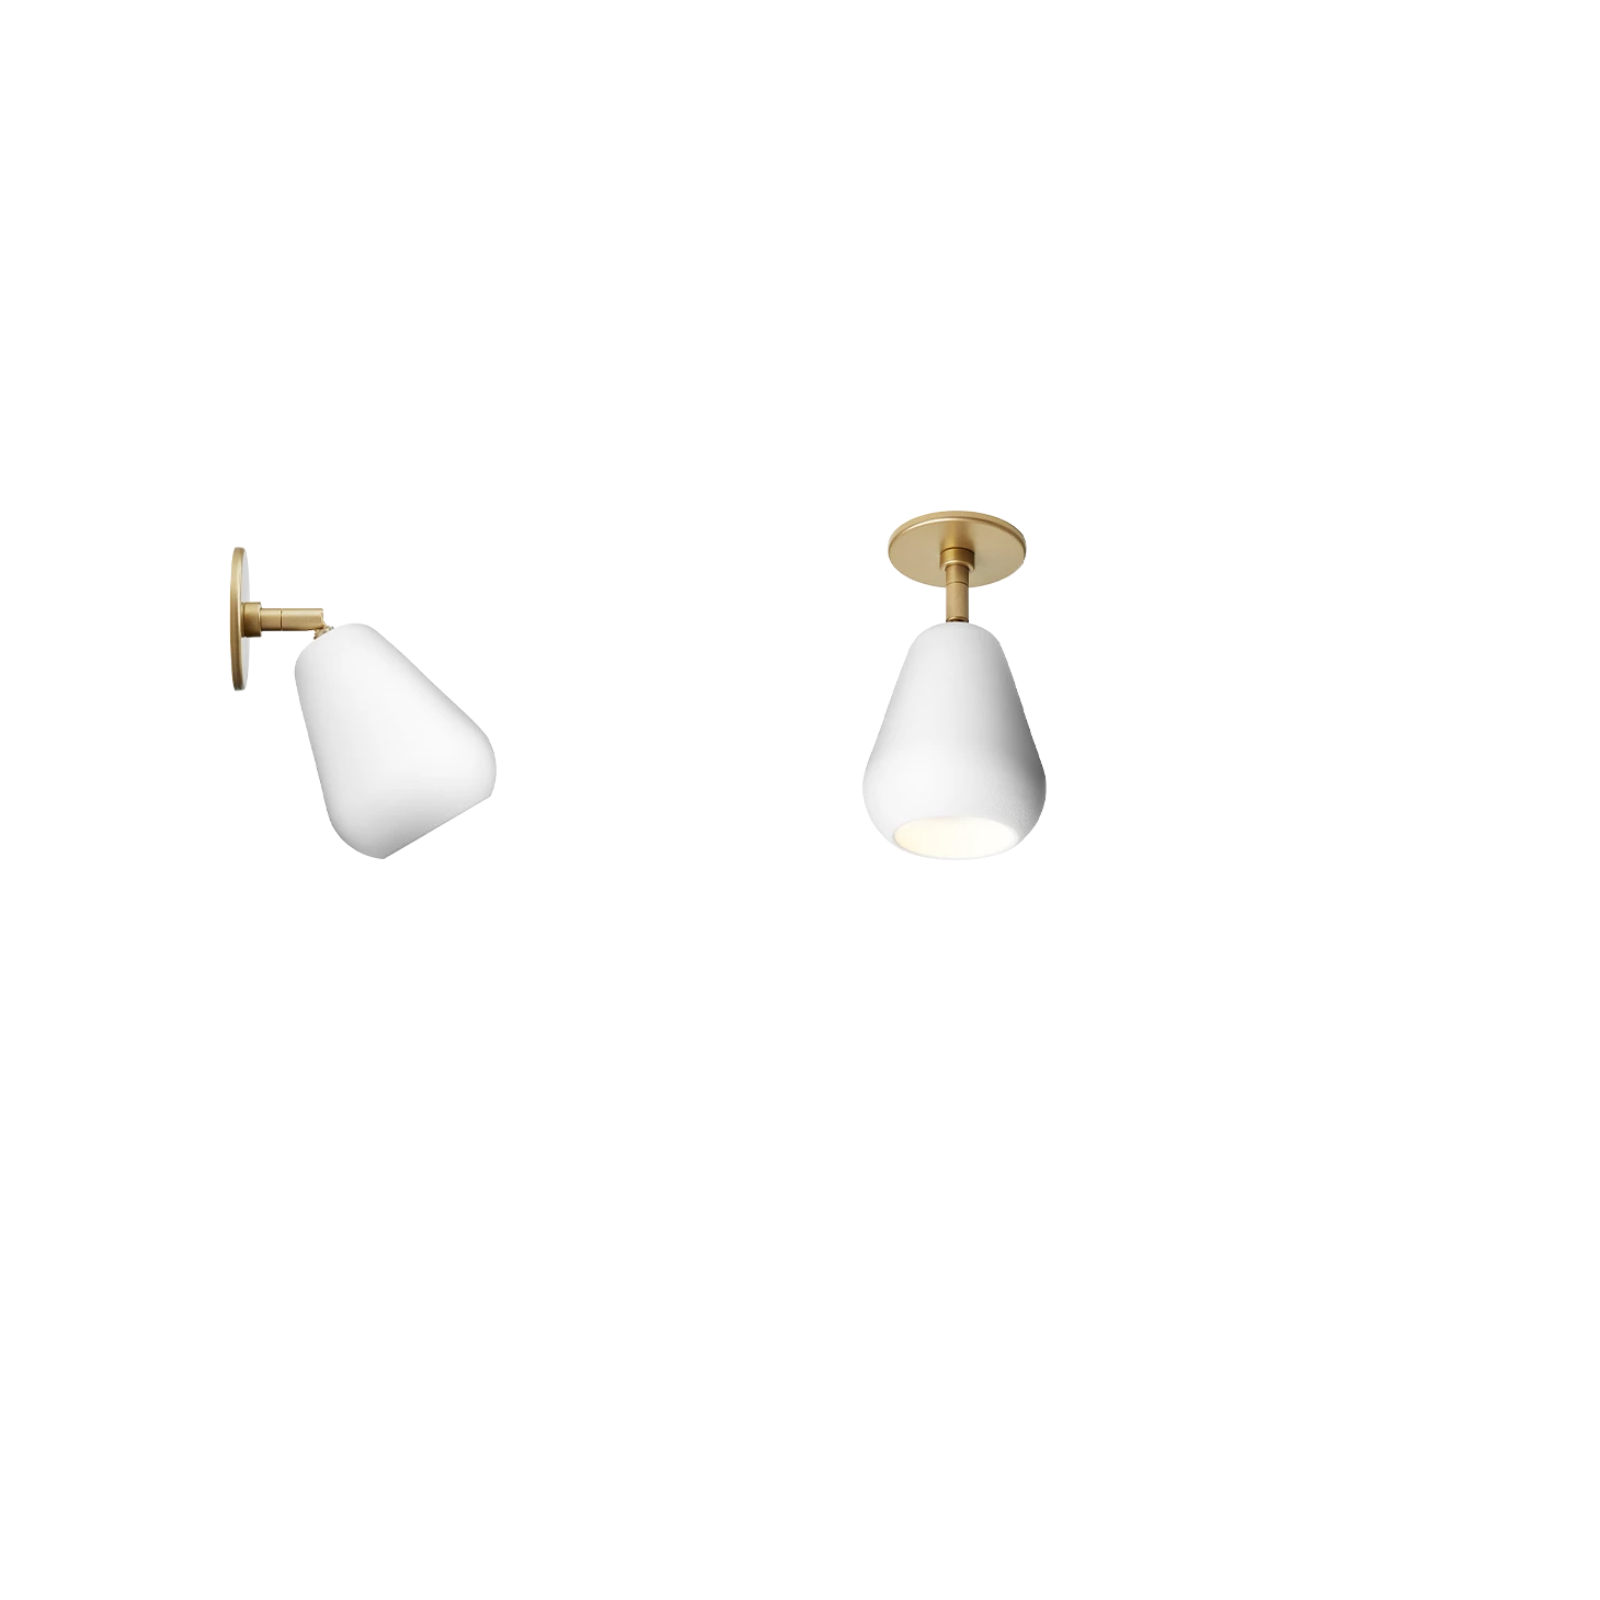 NUURA Anoli Wall and Ceiling Light Nordic Gold and White recessed